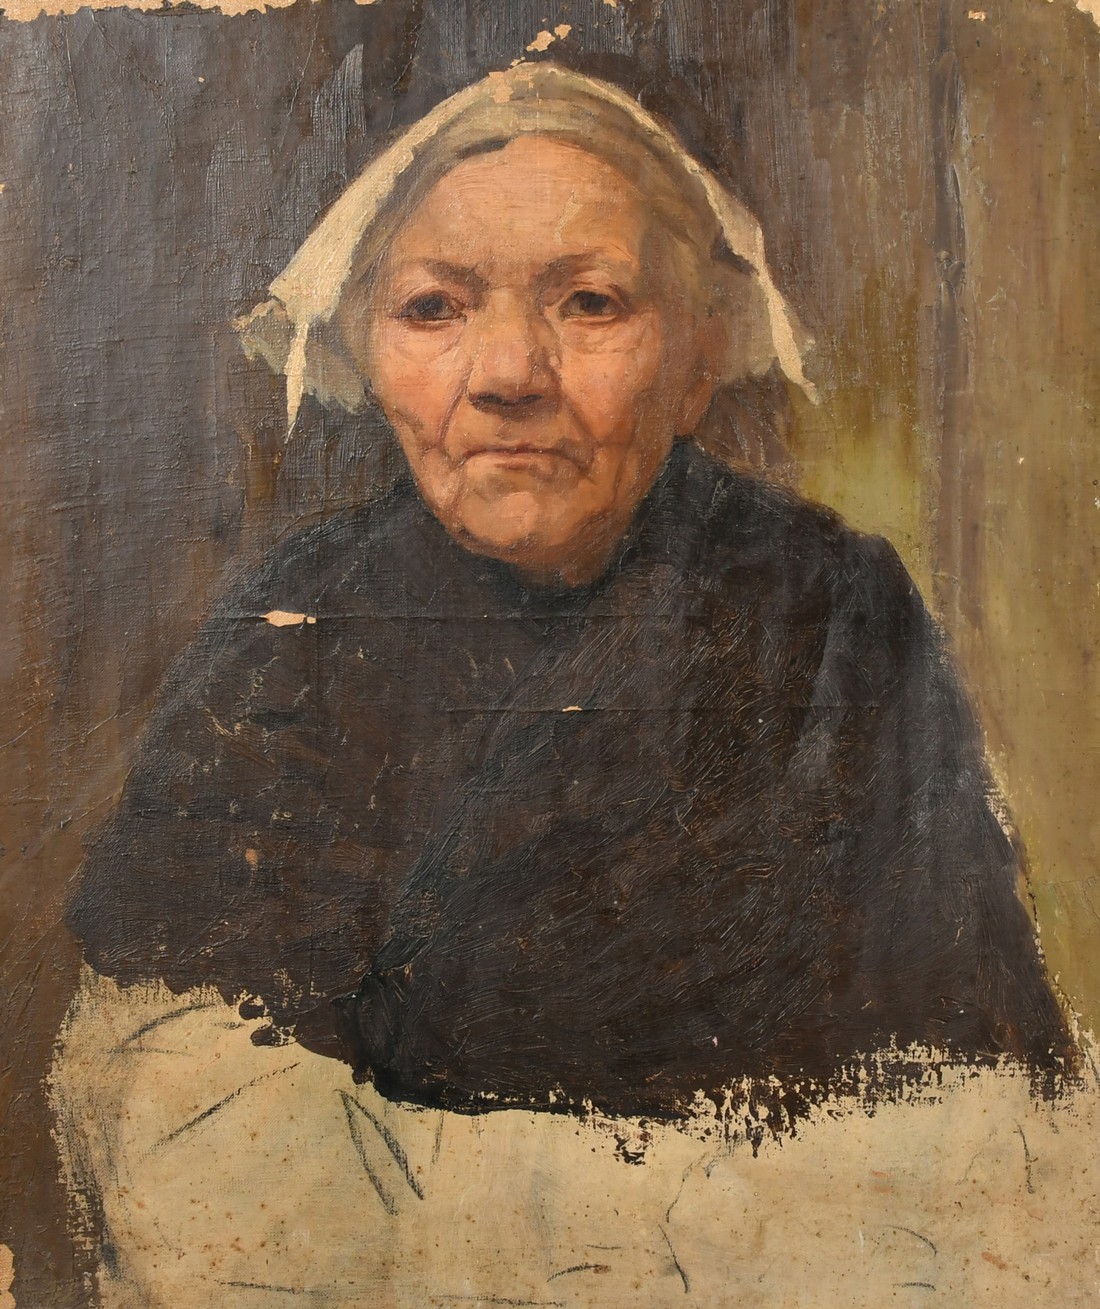 19th Century French School, study of an older female, oil on canvas, 22" x 18" (56 x 46cm), (